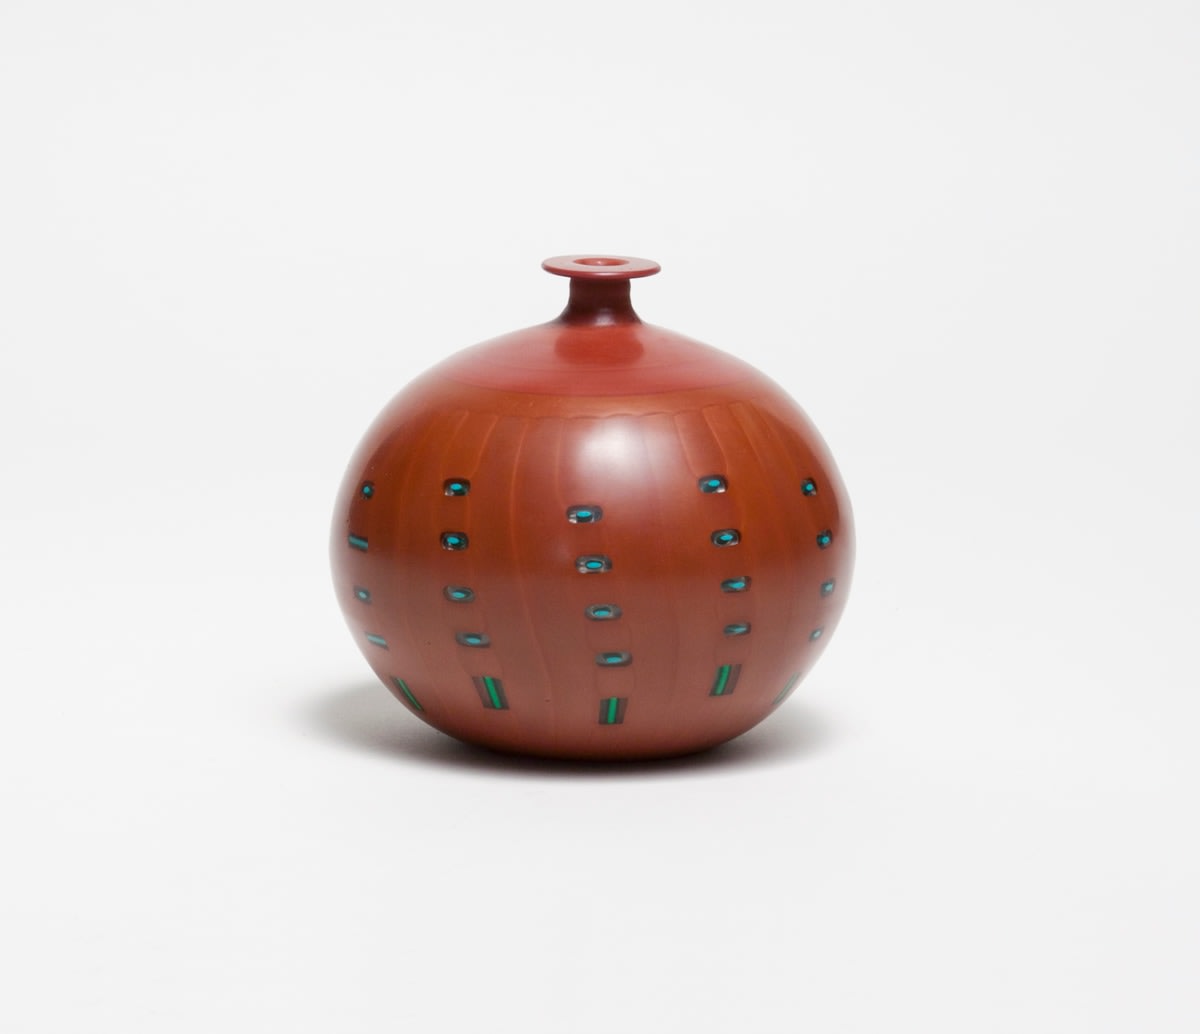 a blown glass vase made in murano by japanese artist yoichi ohira, the round body in a deep red clay color, with embedded clear bubble-like decorations in regular columns and rows each with a tiny inclusion of turquoise